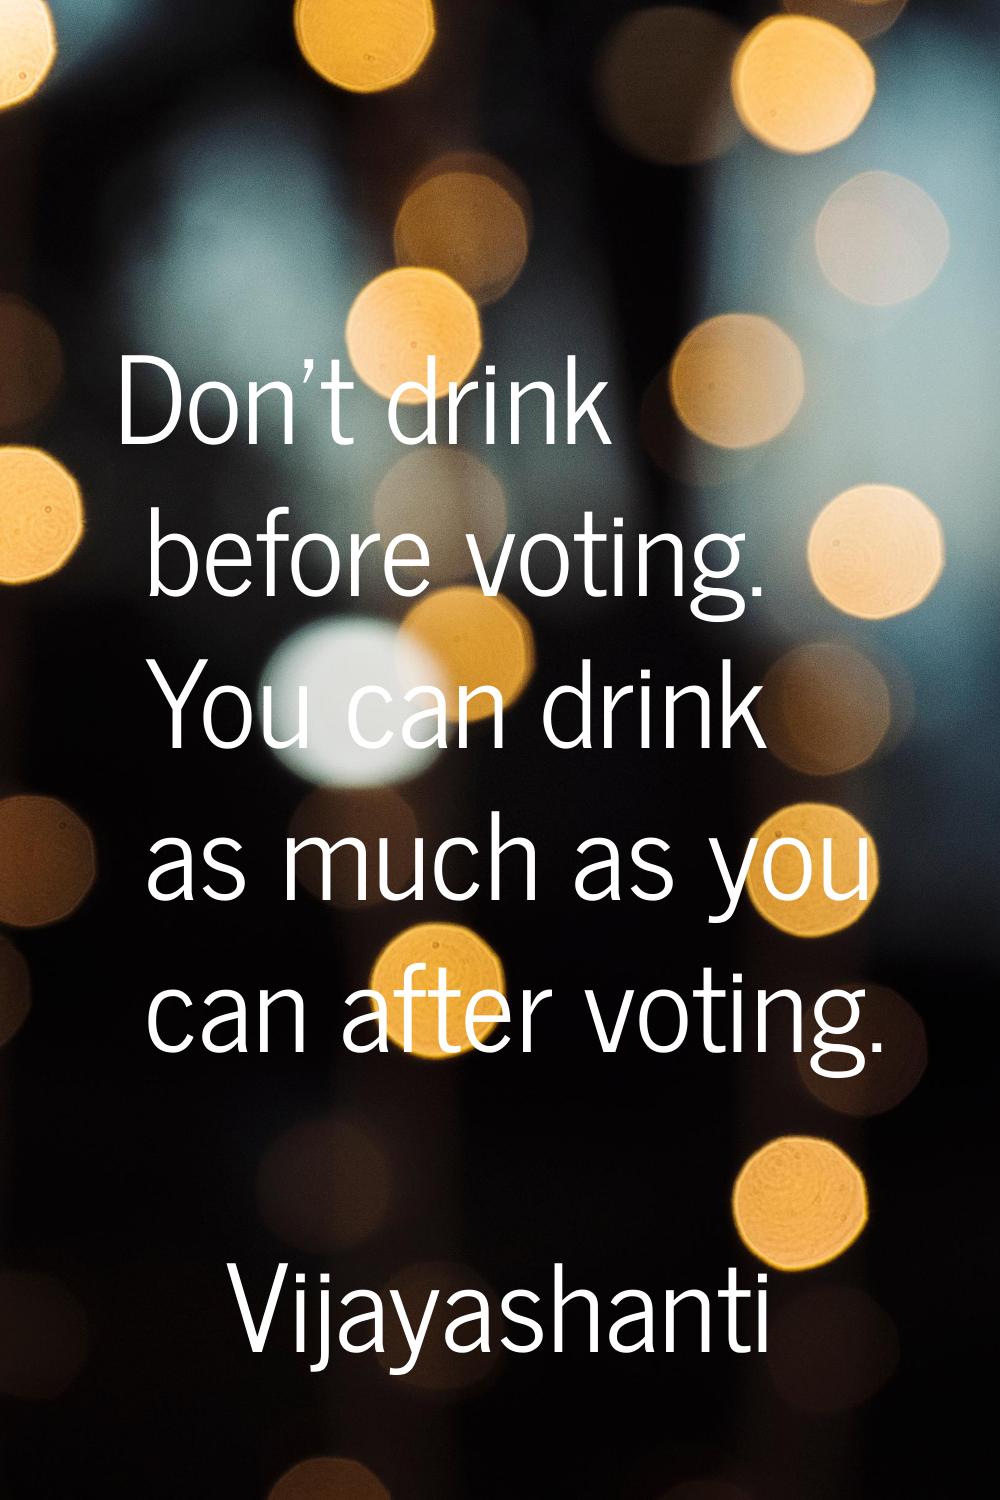 Don't drink before voting. You can drink as much as you can after voting.